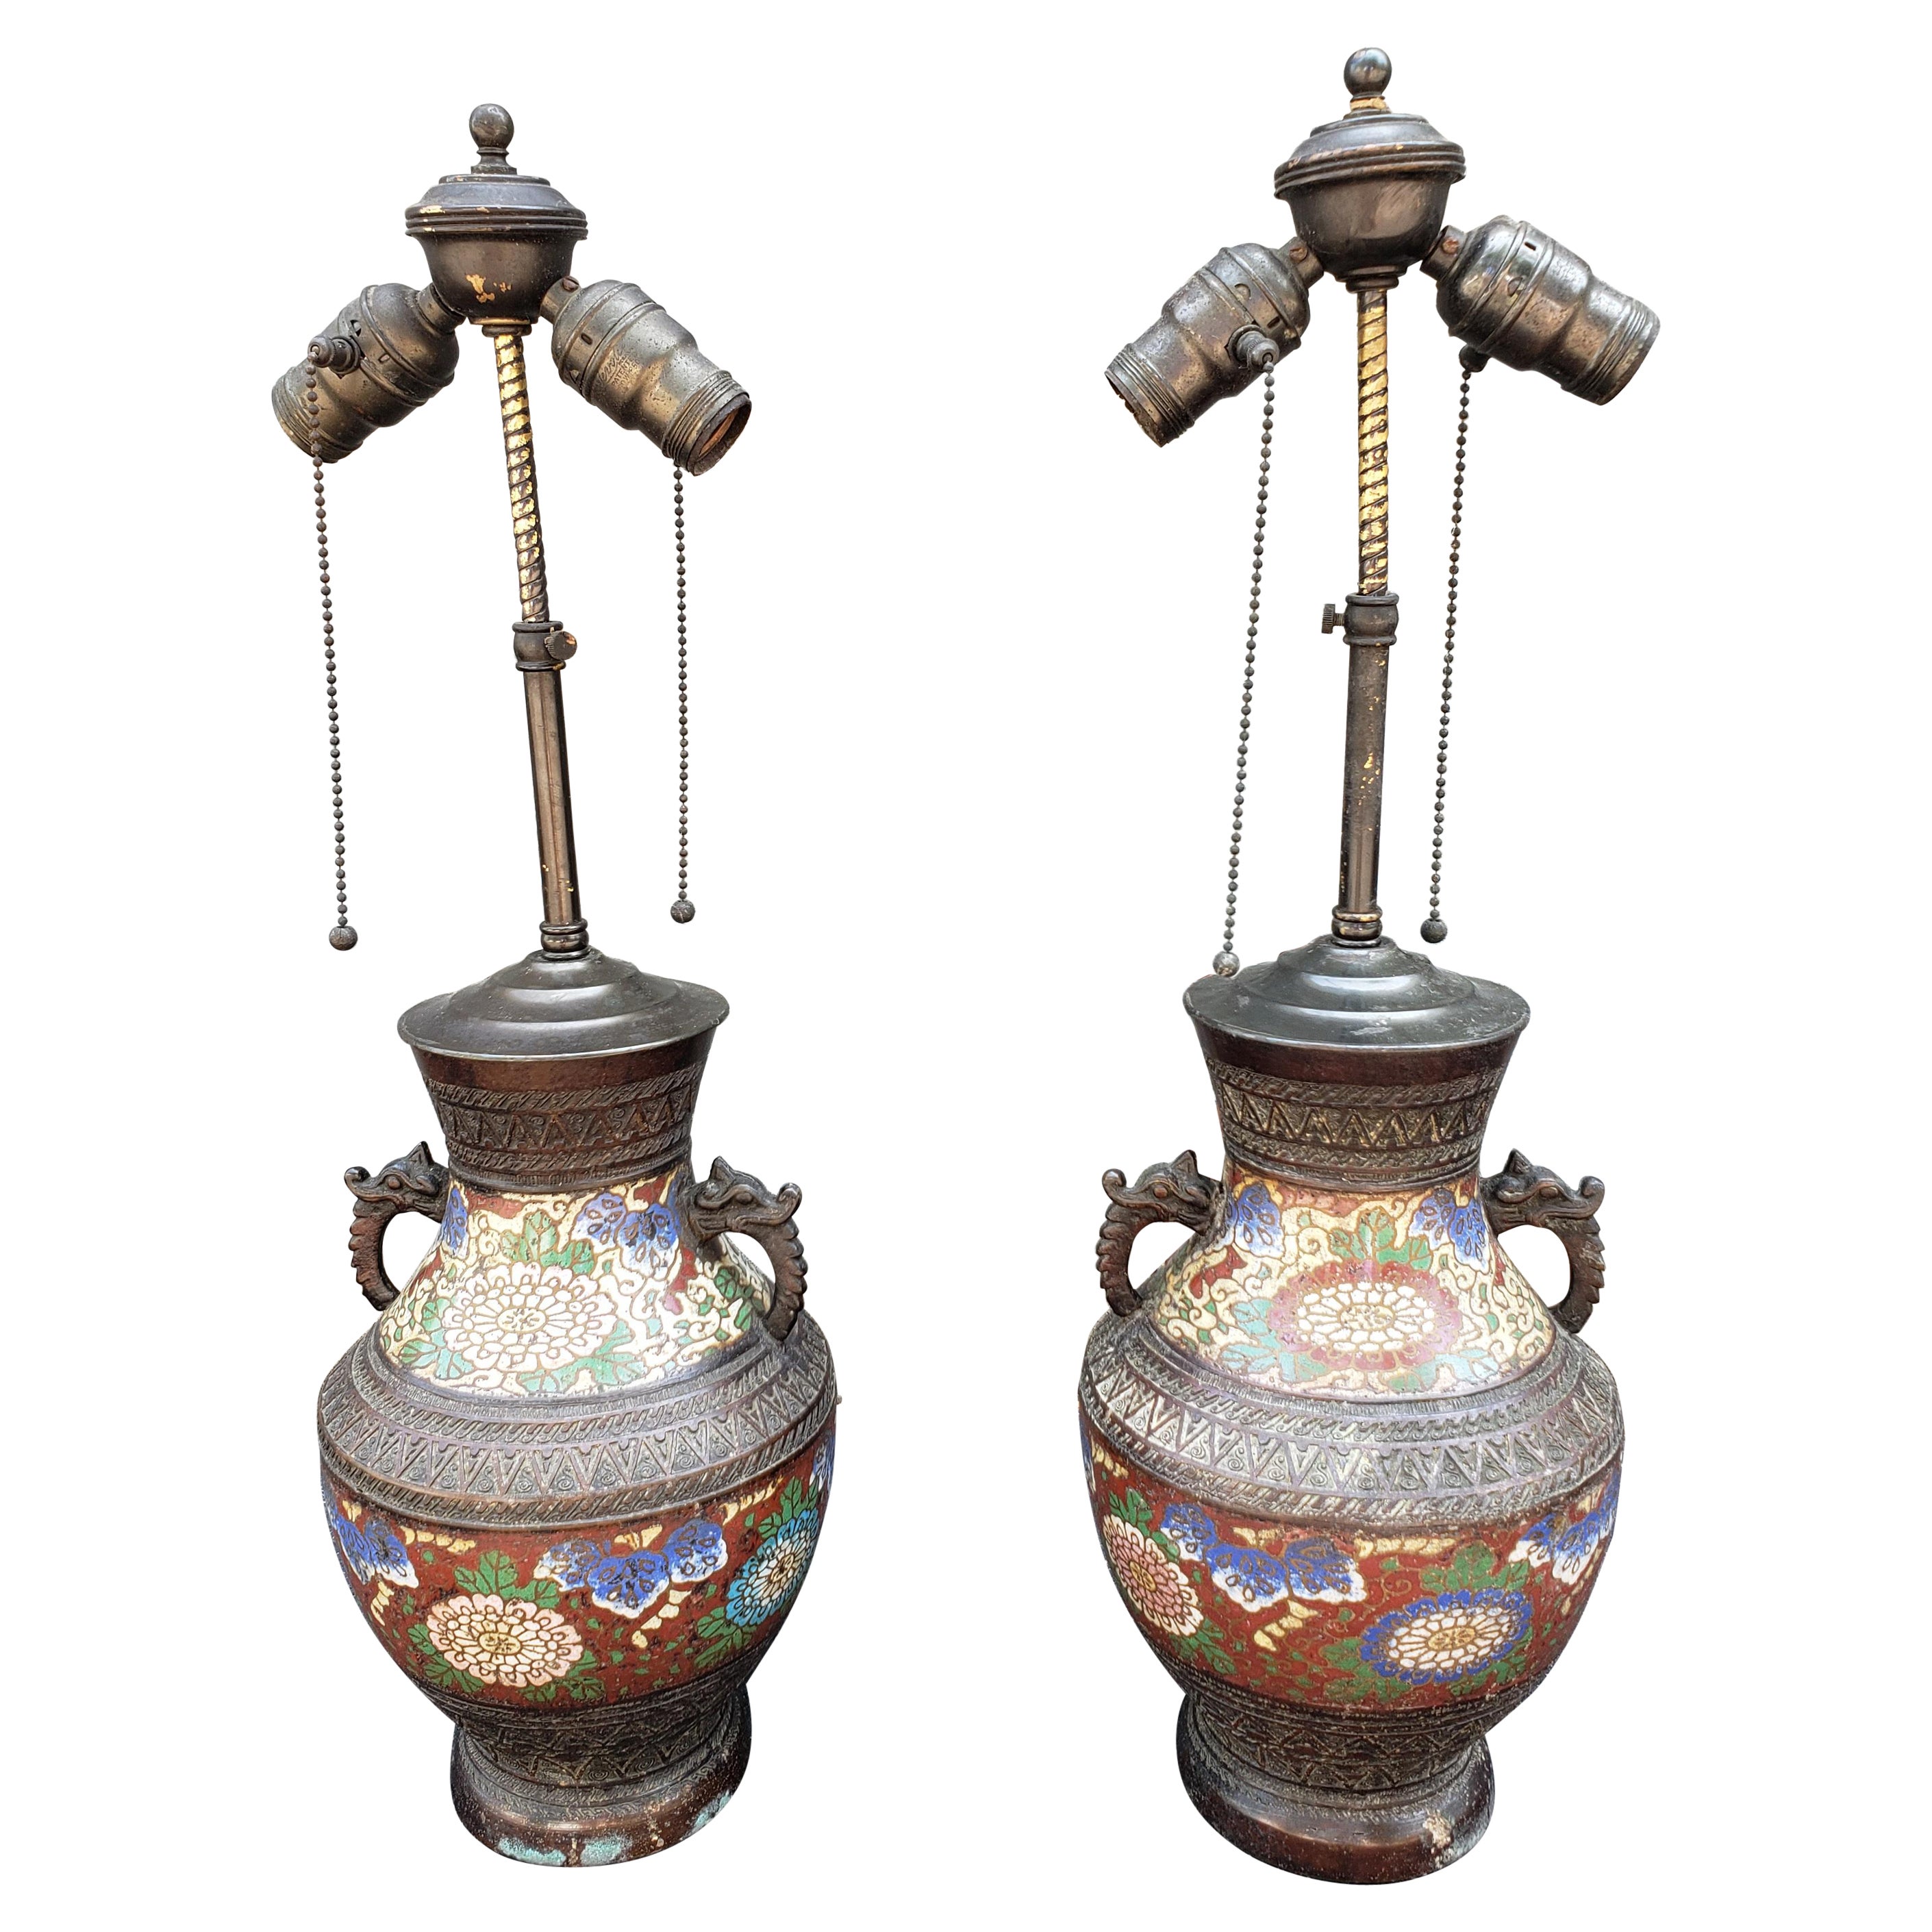 Pair of 19th C Meiji Bronze Champleve and Cloisonne Enamel Vases Mounted as Lamp For Sale